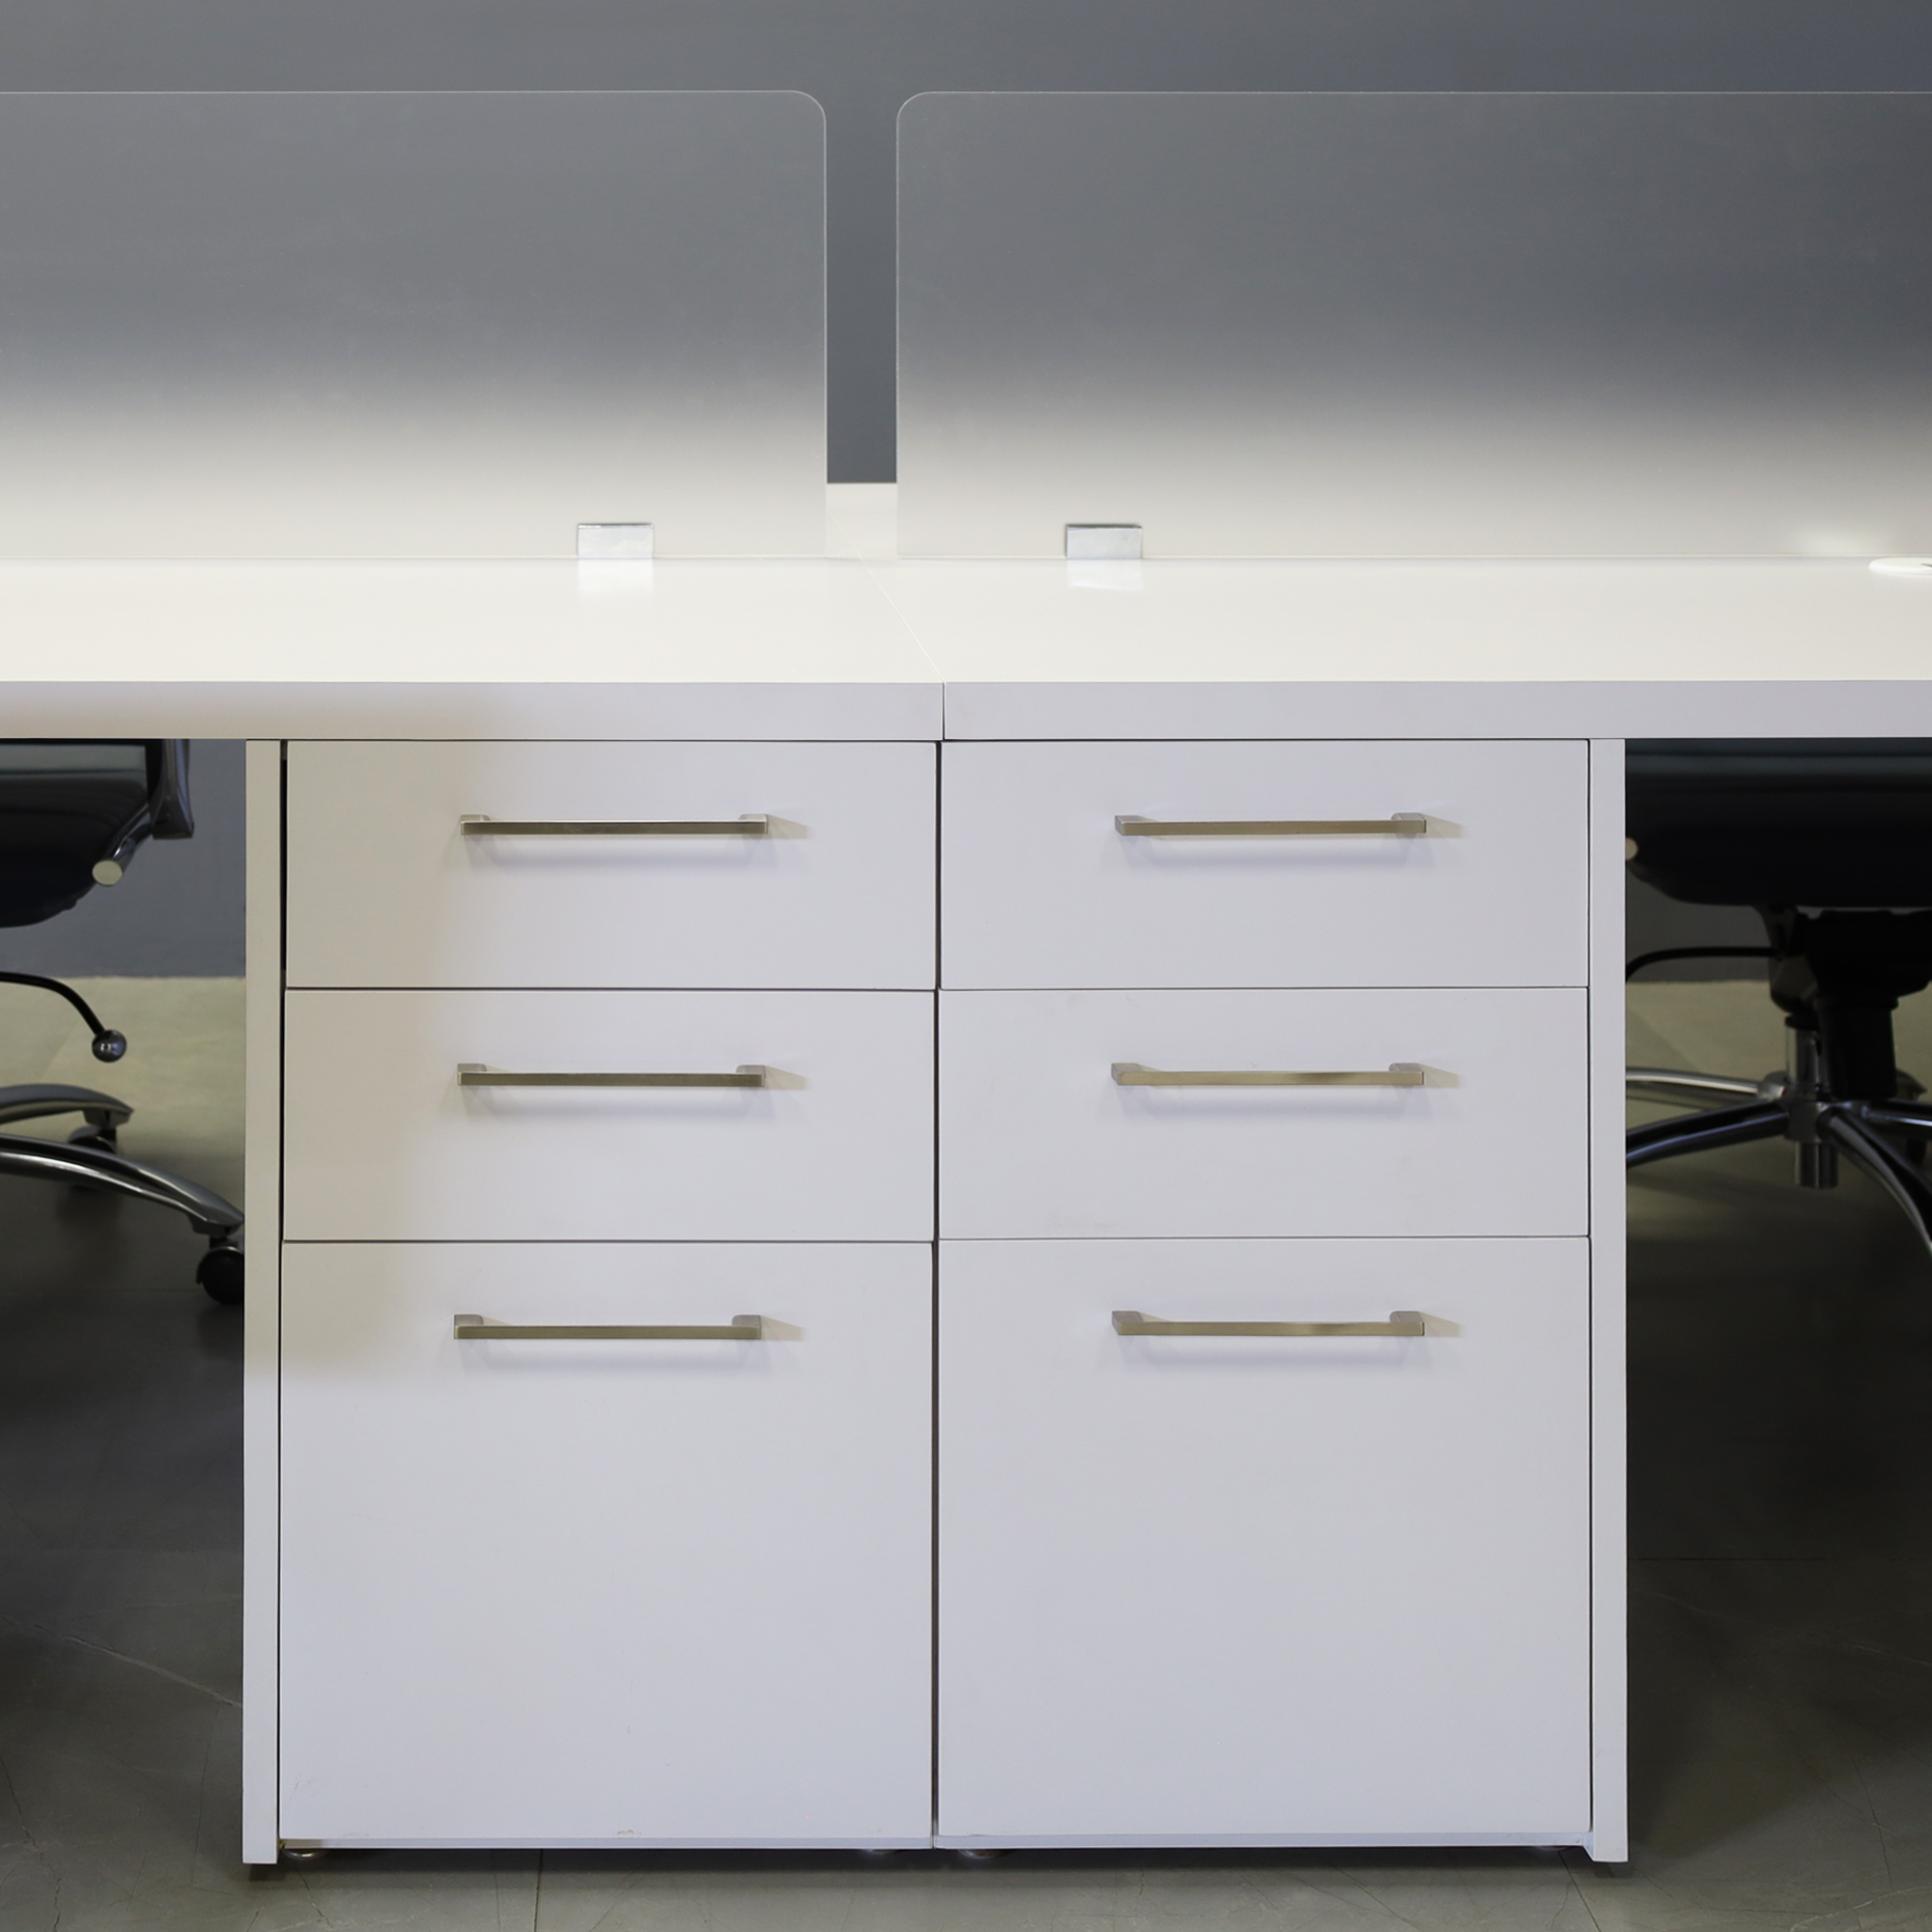 120-inch aXis Workstation in white gloss laminate top, legs and storages, and two frosted acrylics partitions shown here.